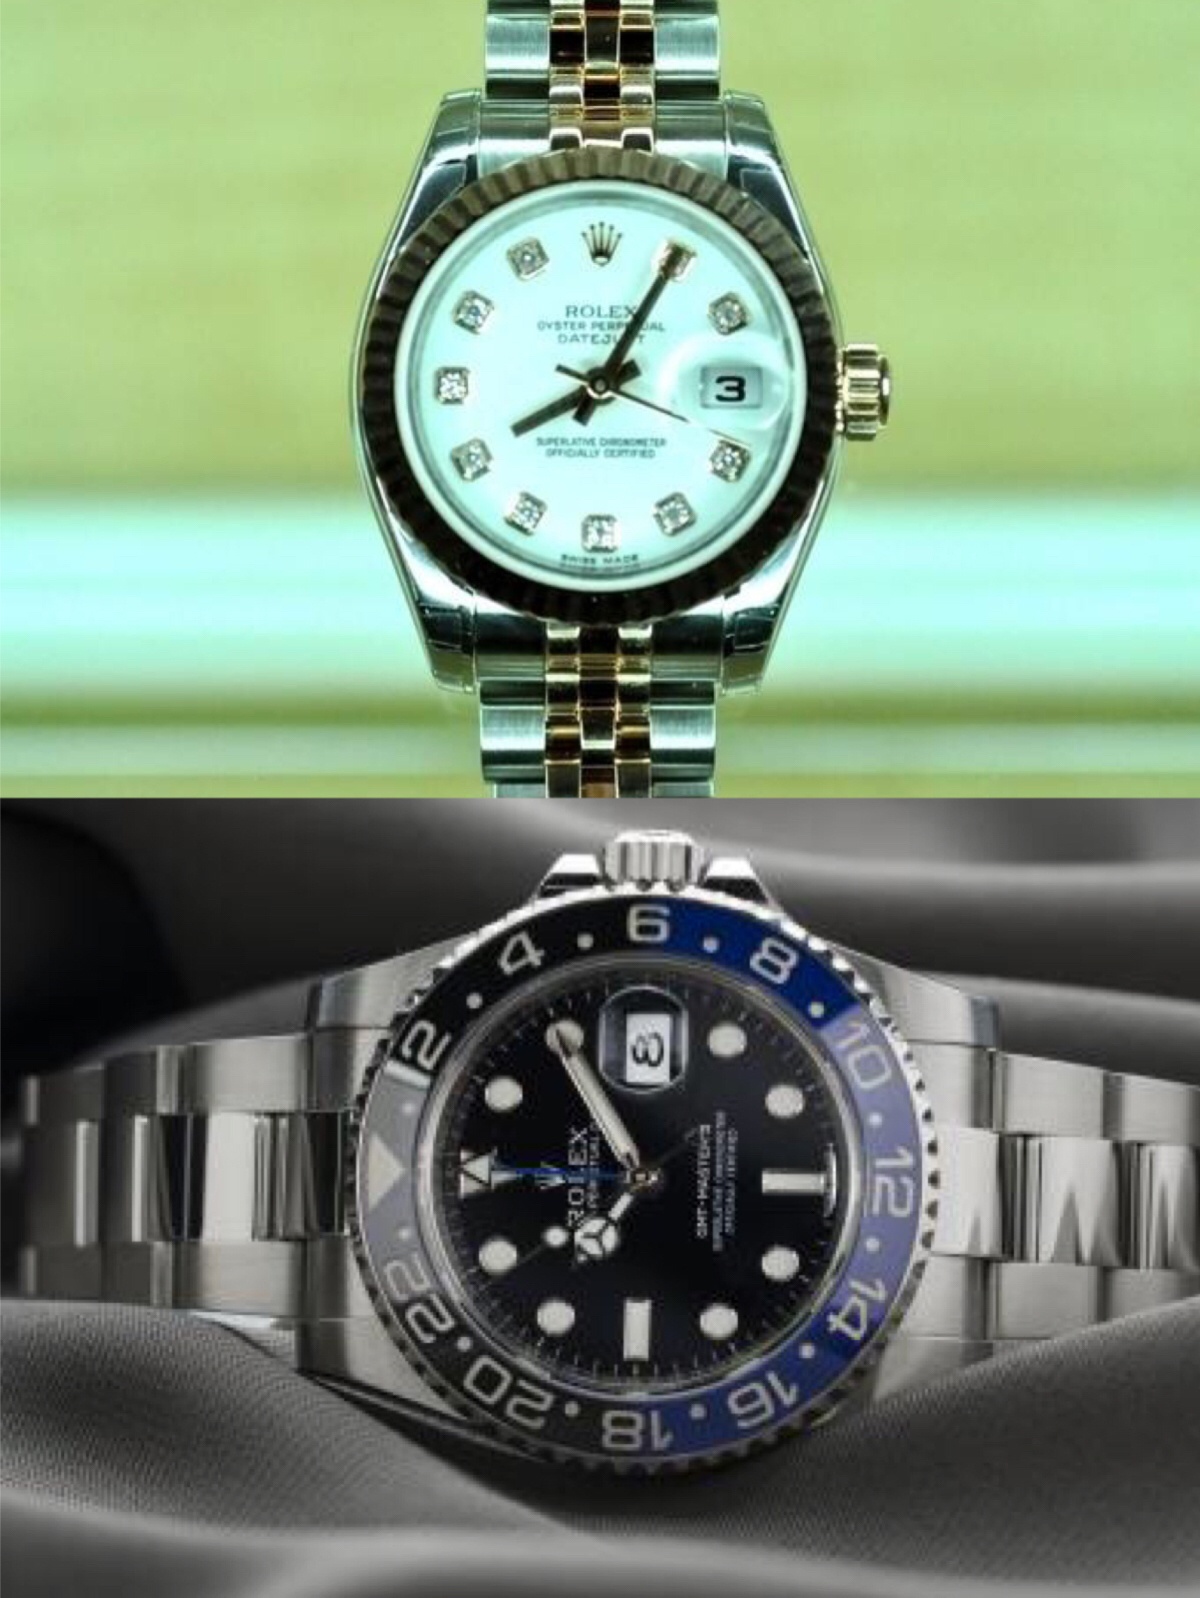 Are you really afraid that the Swiss Replica Rolex explosion that you bought will fall?